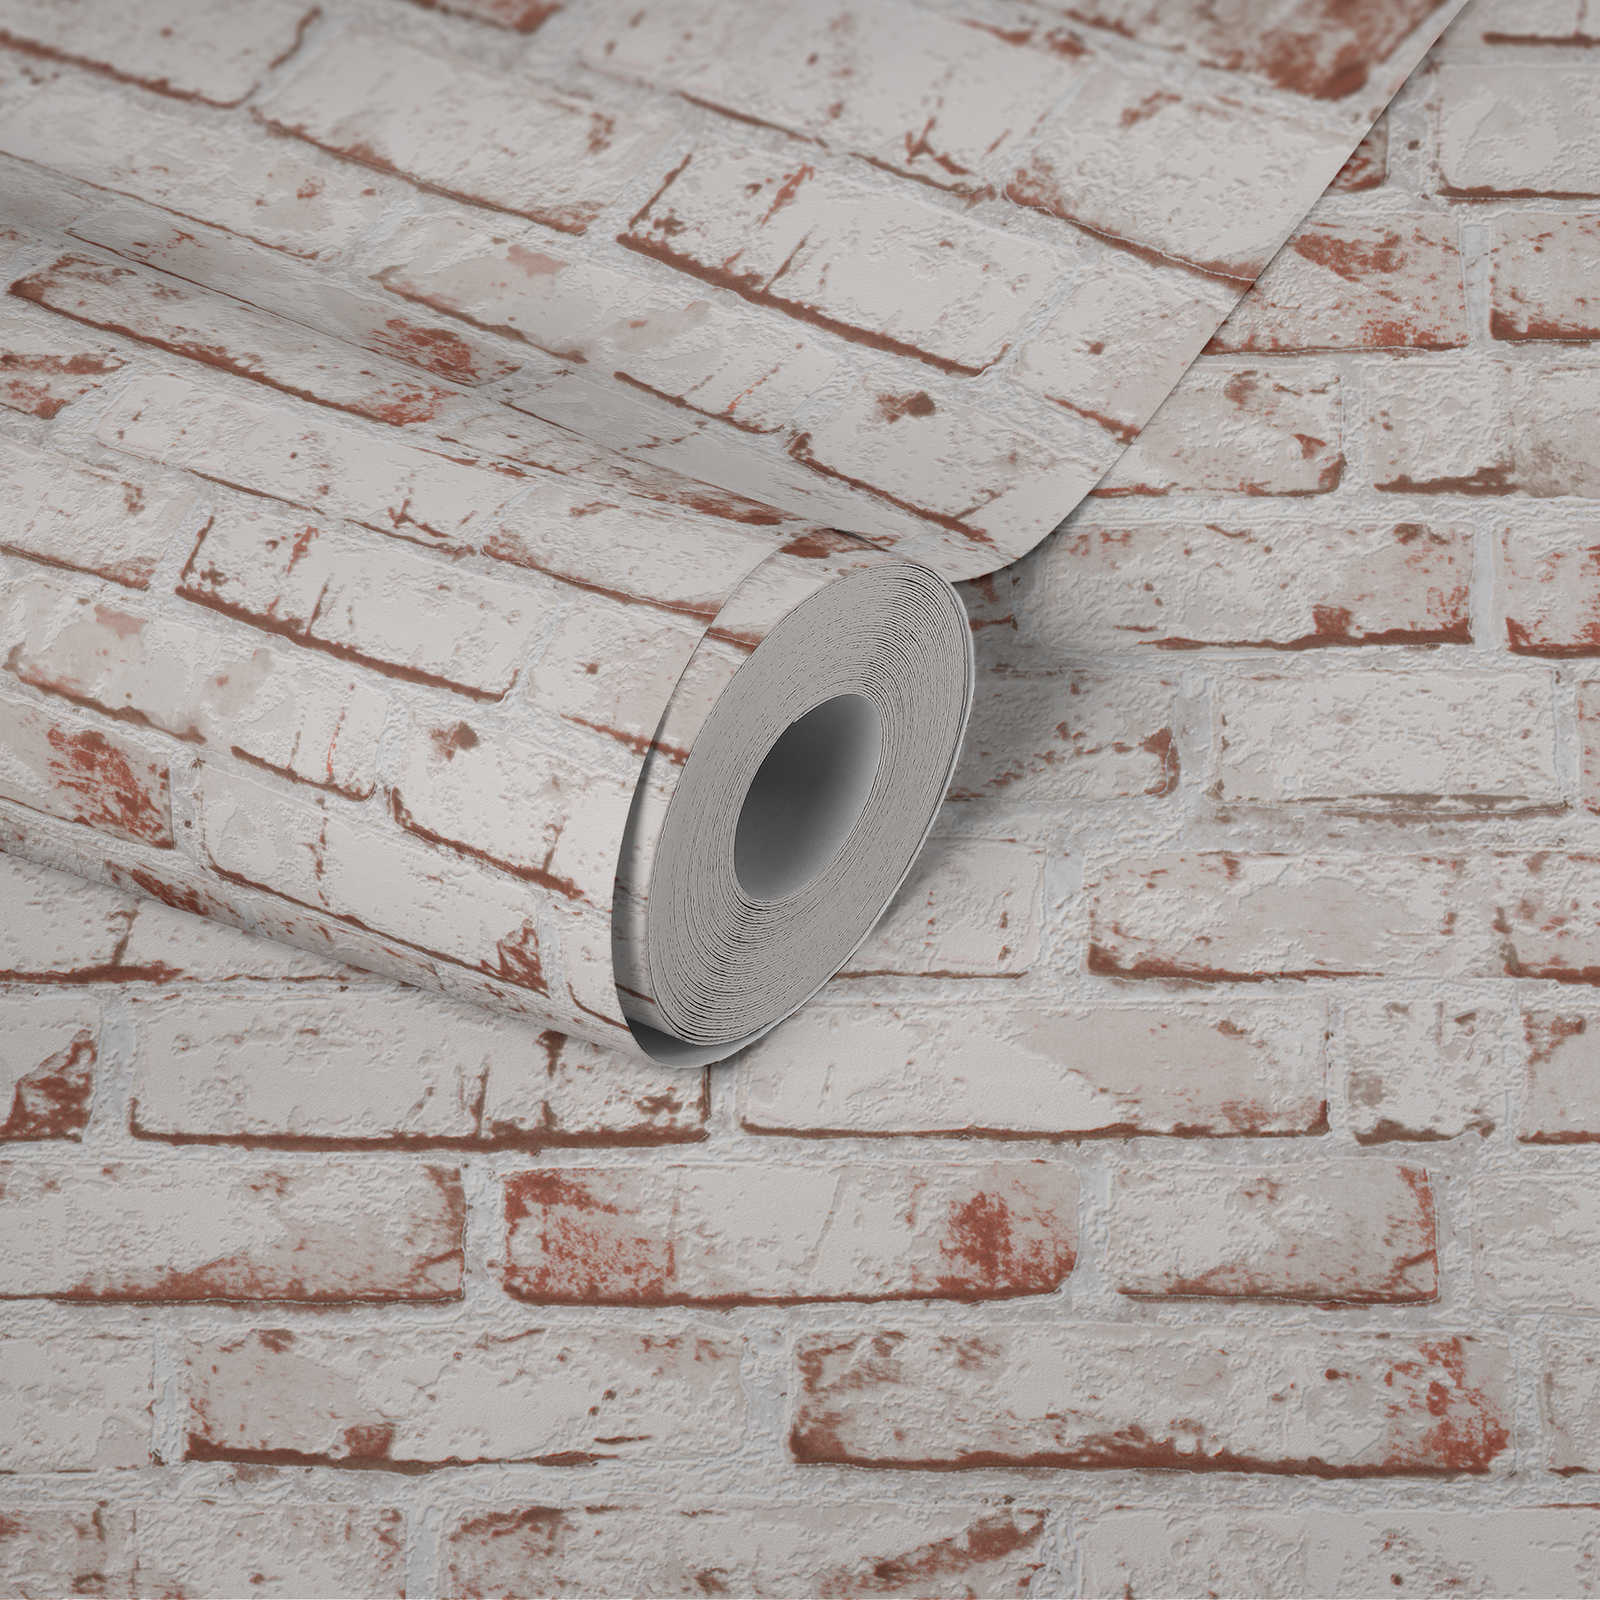             Stone optics wallpaper with rustic brick wall & 3D effect - red, brown, beige
        